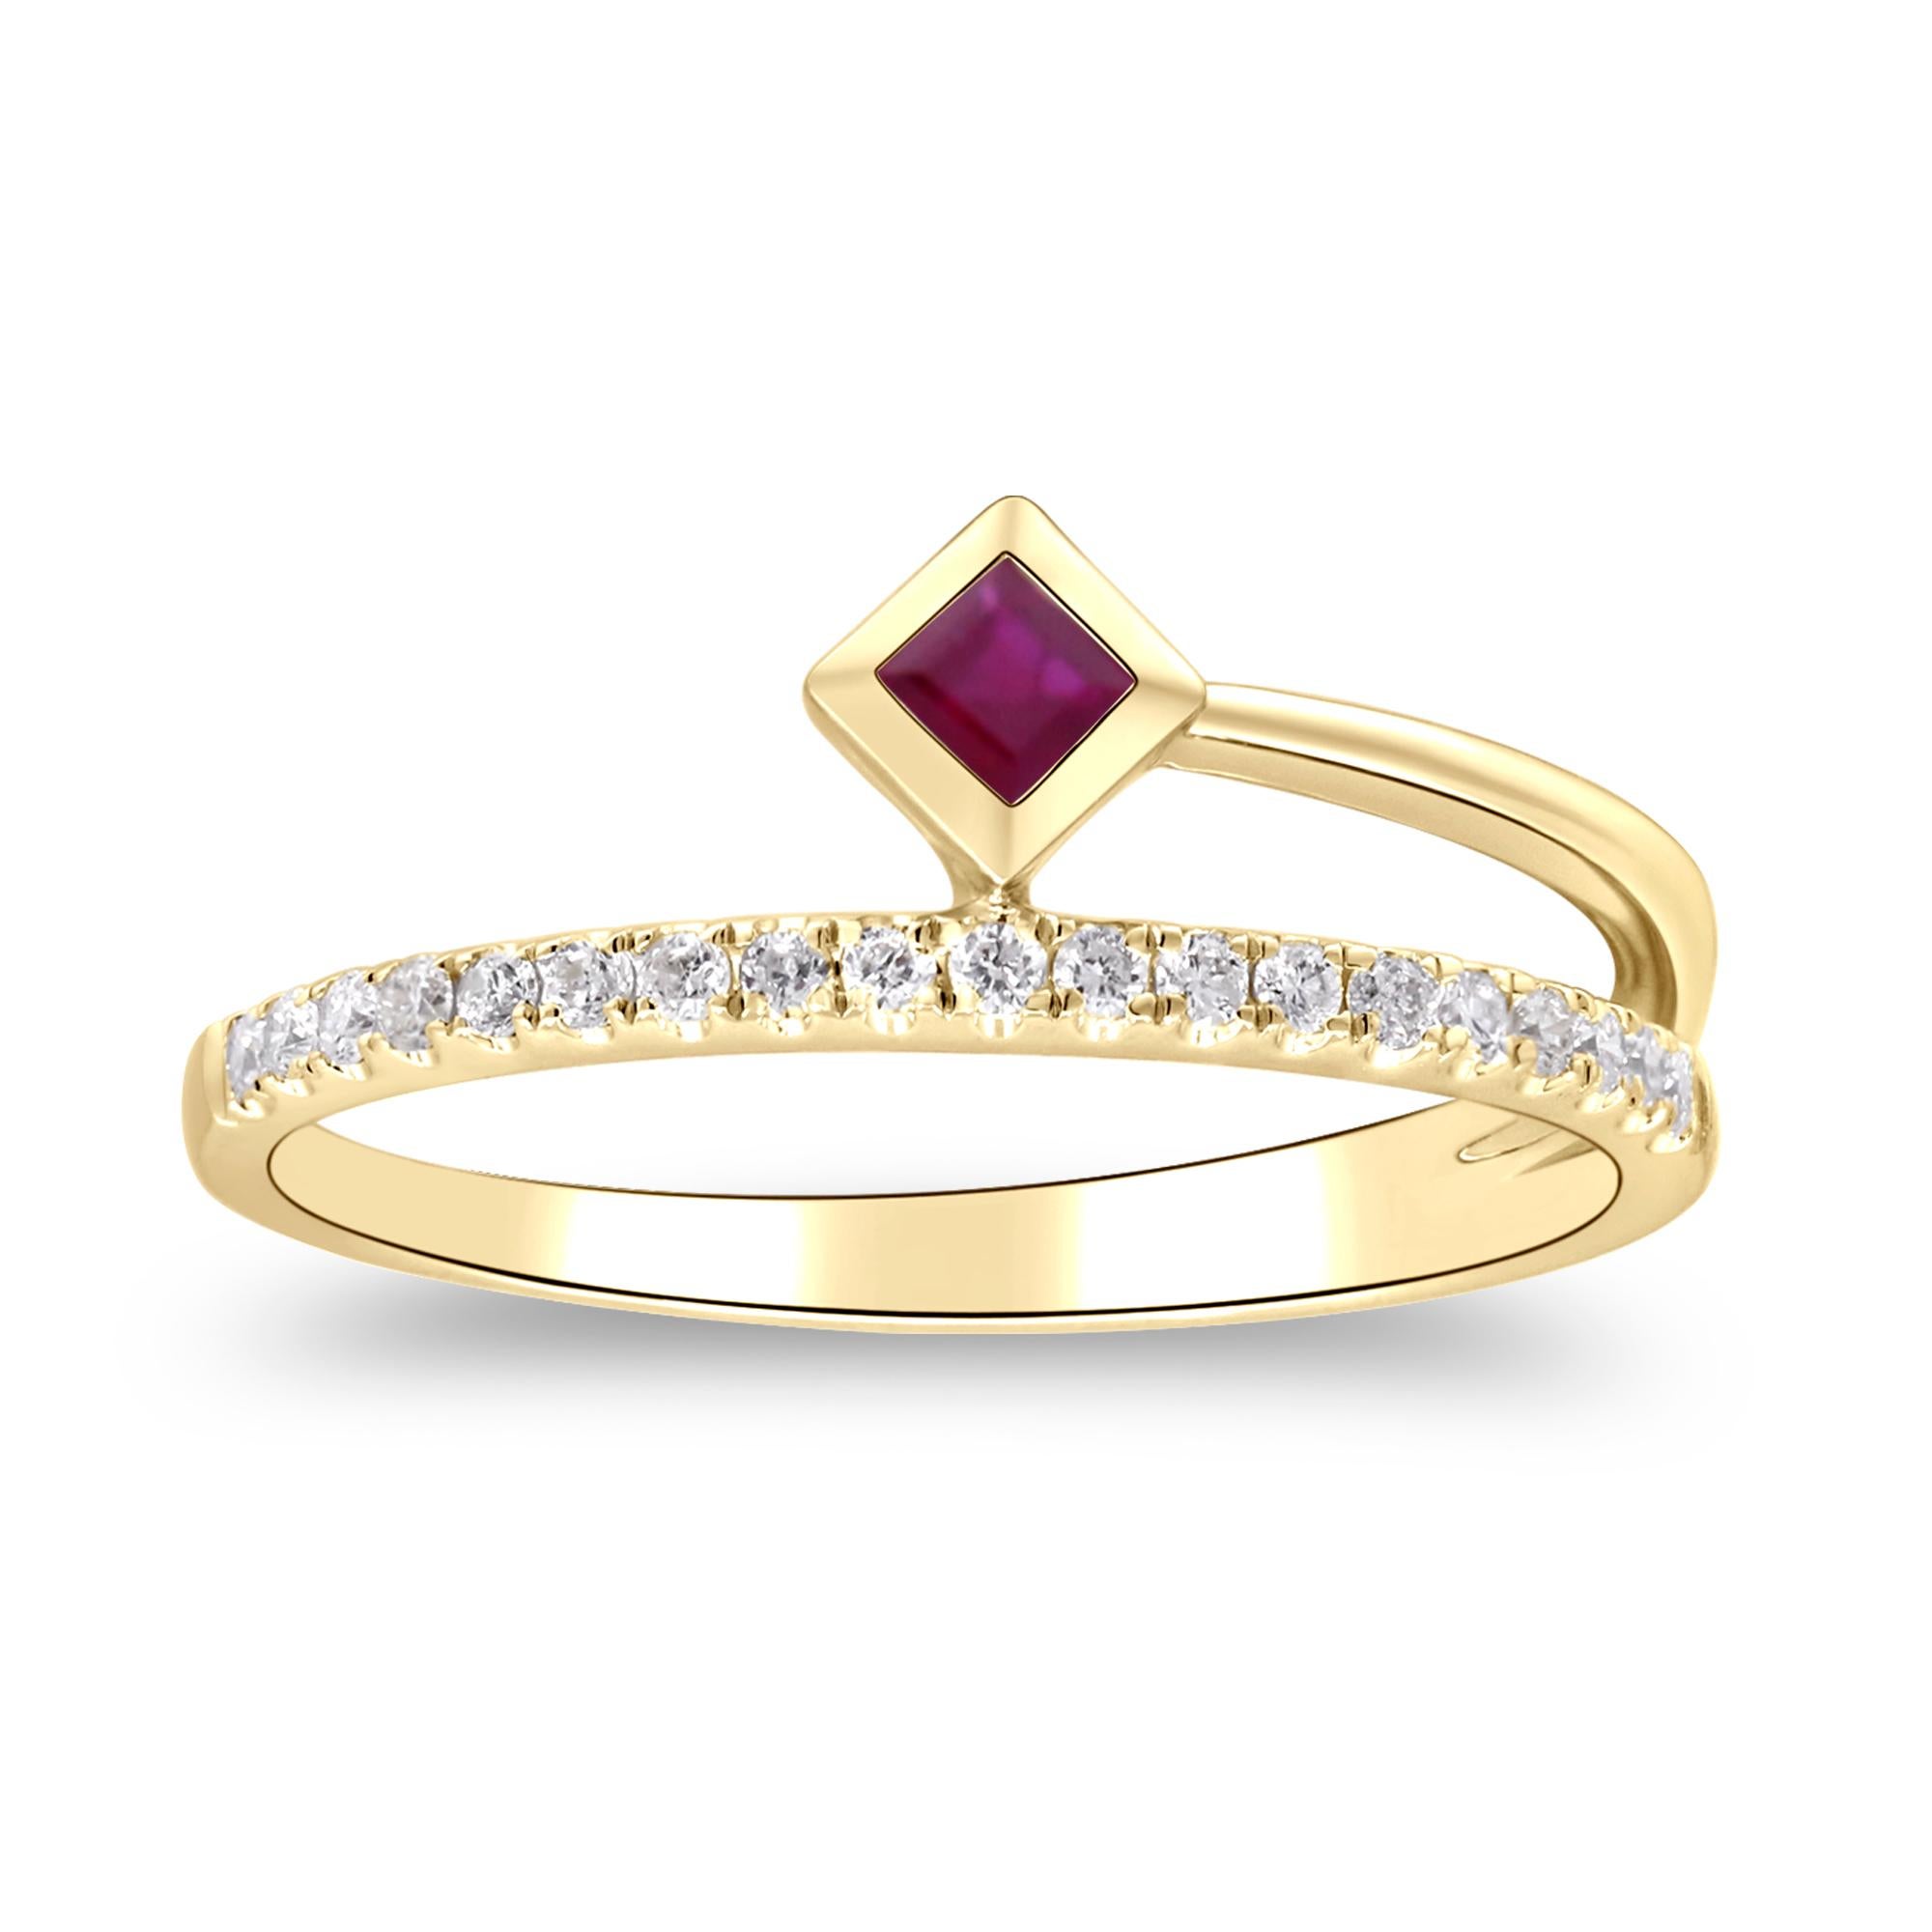 Stunning, timeless and classy eternity Unique Ring. Decorate yourself in luxury with this Gin & Grace Ring. The 14K Yellow Gold jewelry boasts 2.5 mm (1 pcs) 0.12 carat Square-Cut Prong Setting Ruby, along with Natural Round-cut white Diamond (19